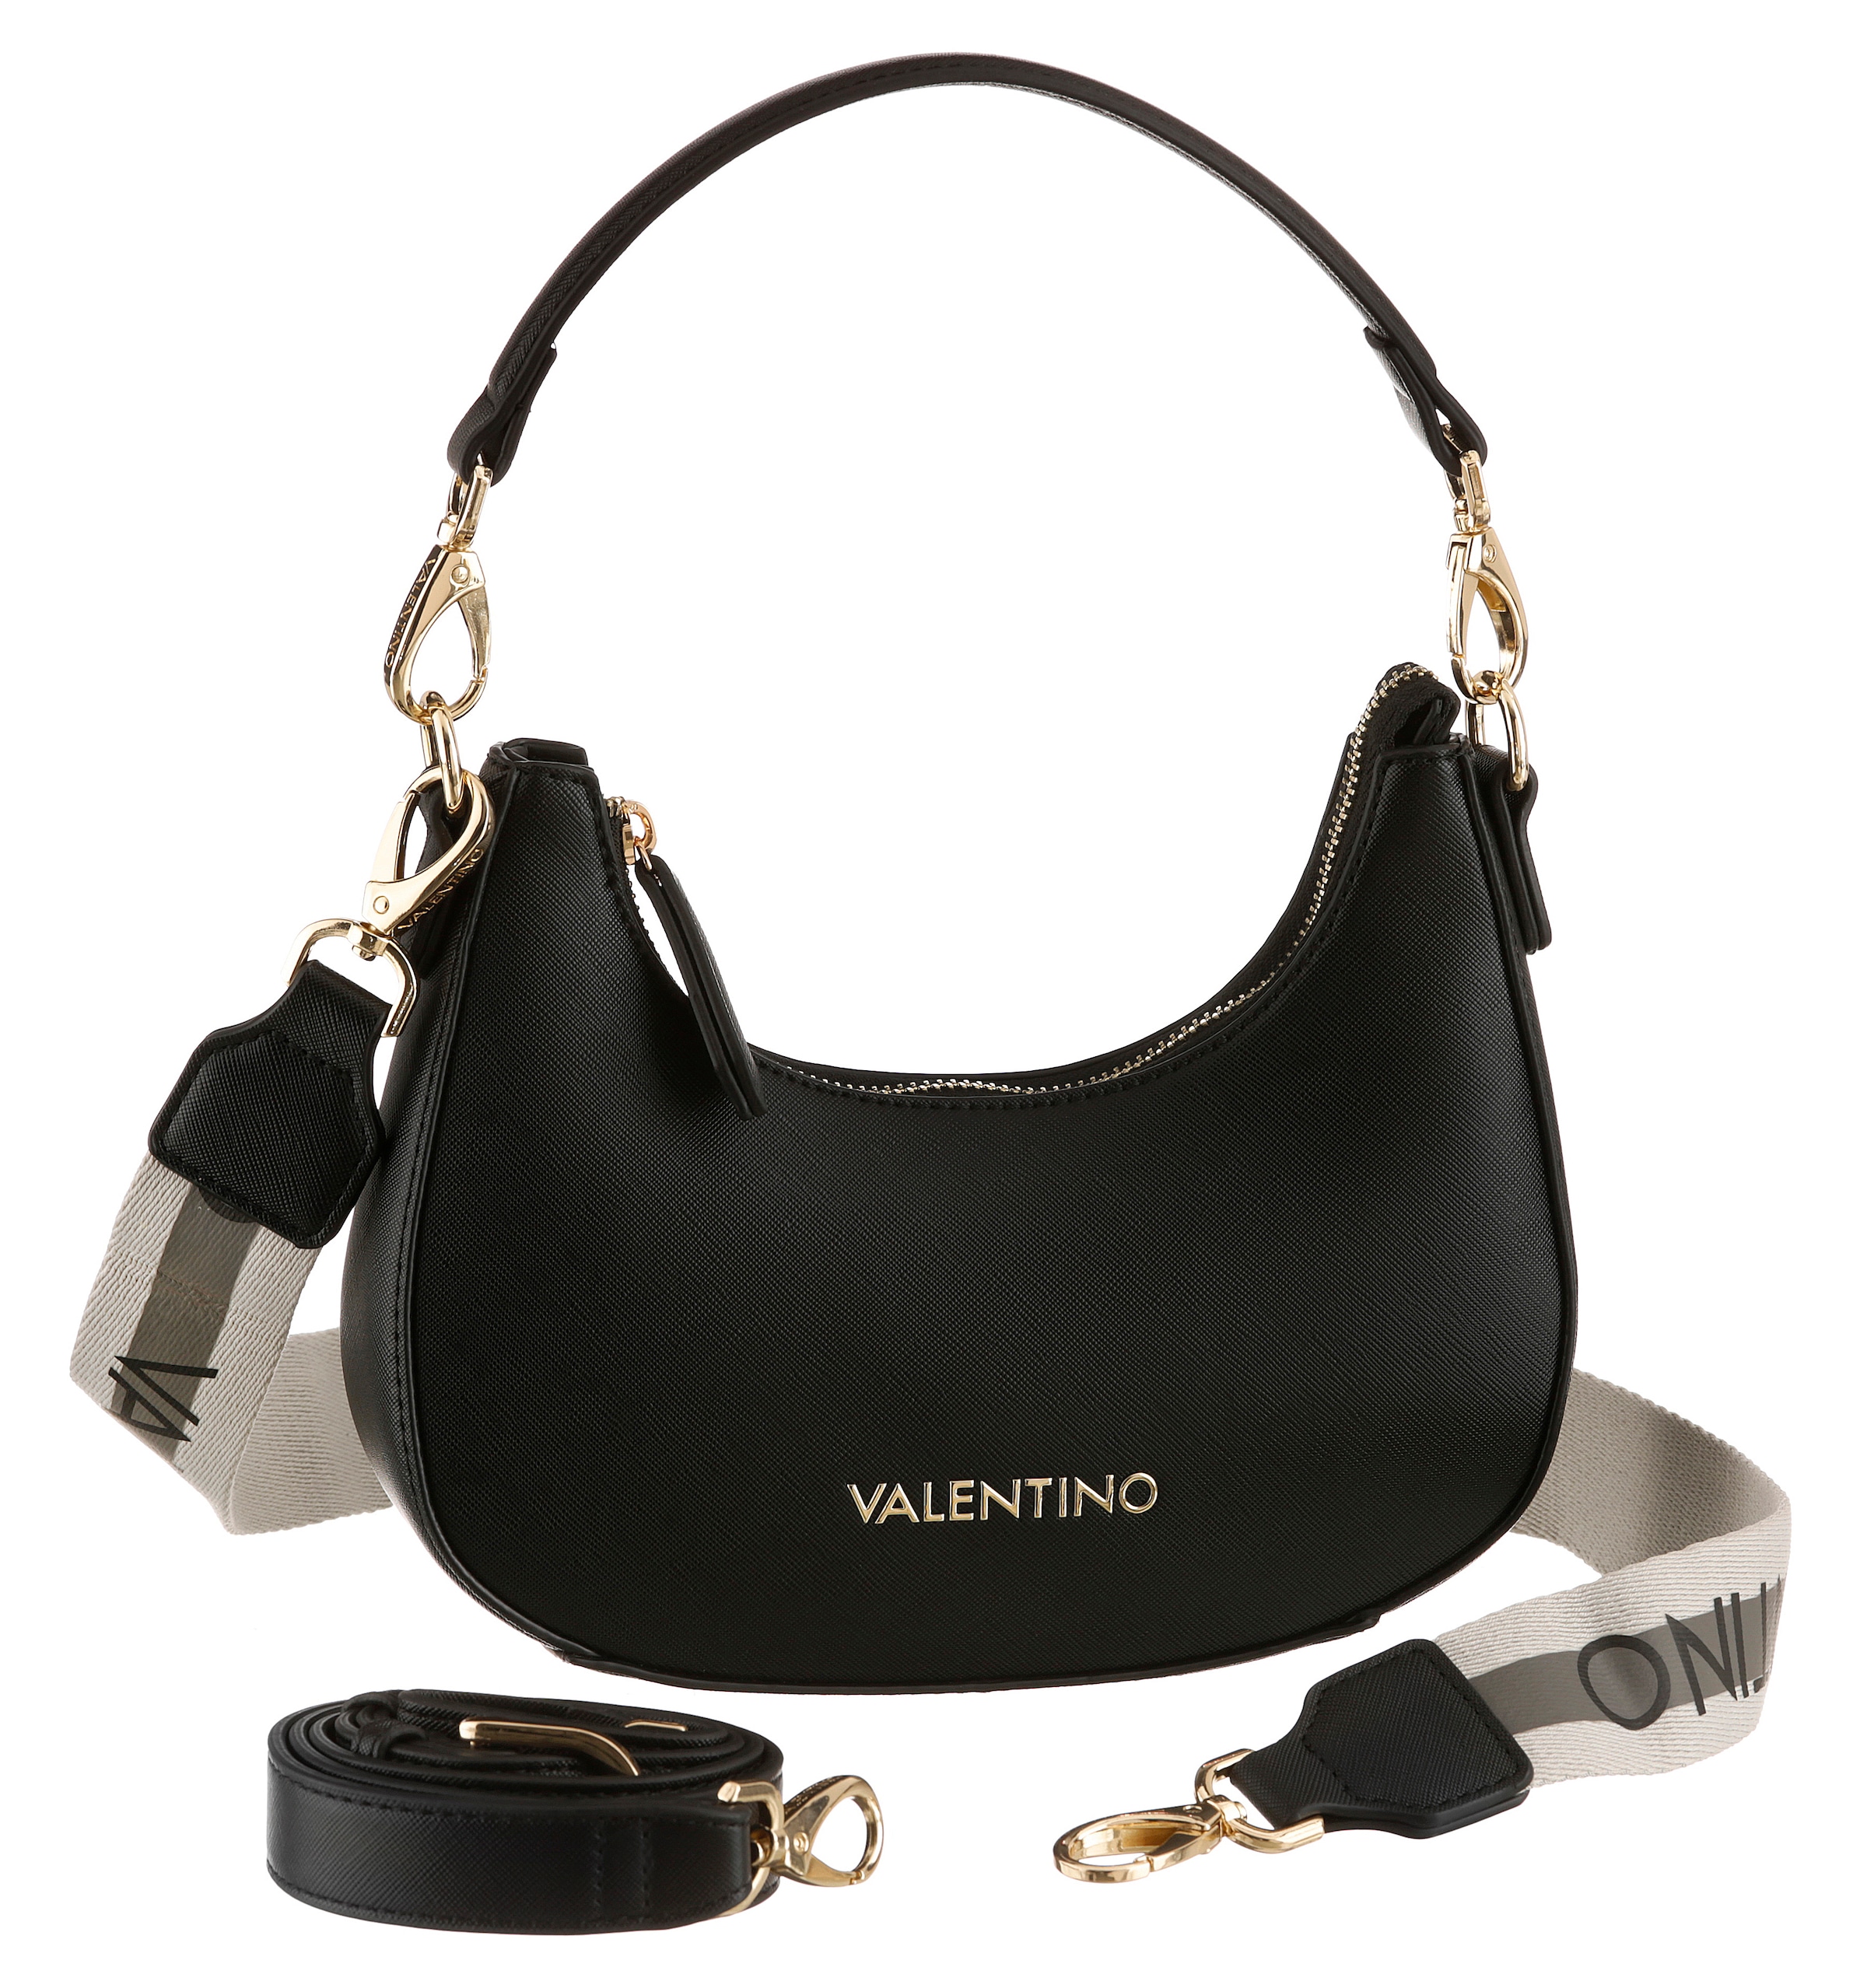 Valentino Zero Re Pink Small Hobo Shoulder Bag, pink : .co